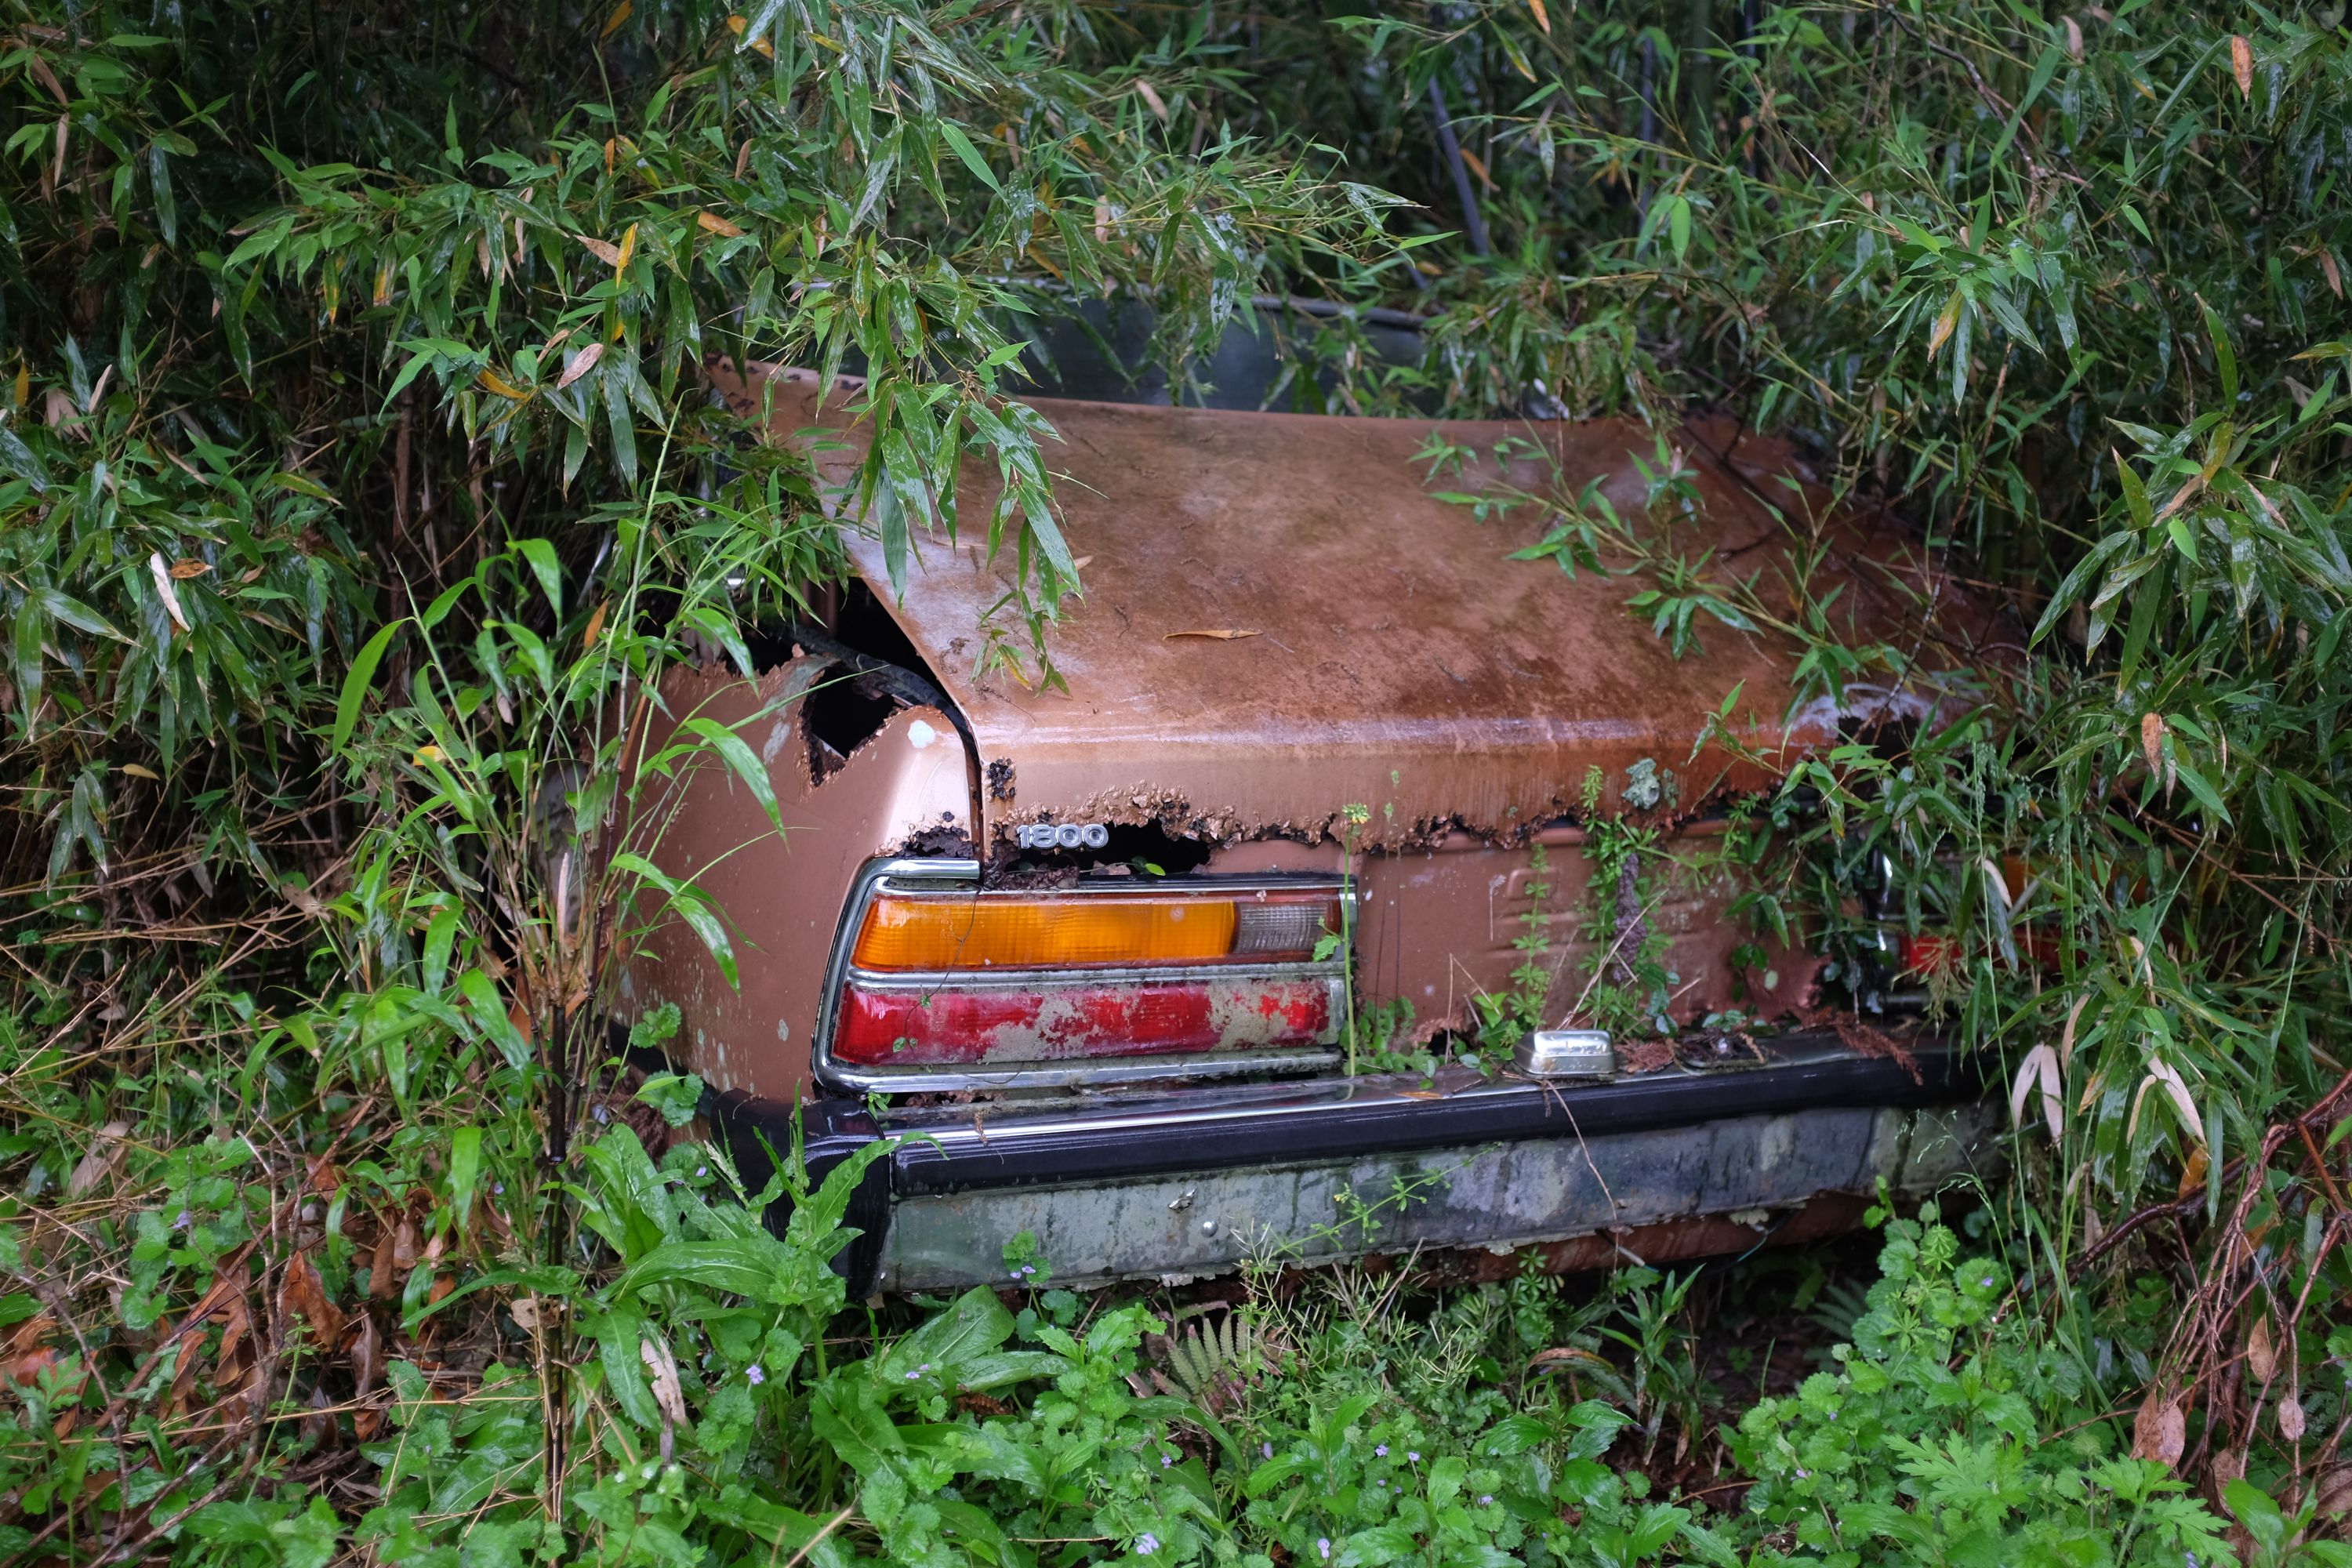 A rusty, abandoned car submerged in the wet undergrowth.